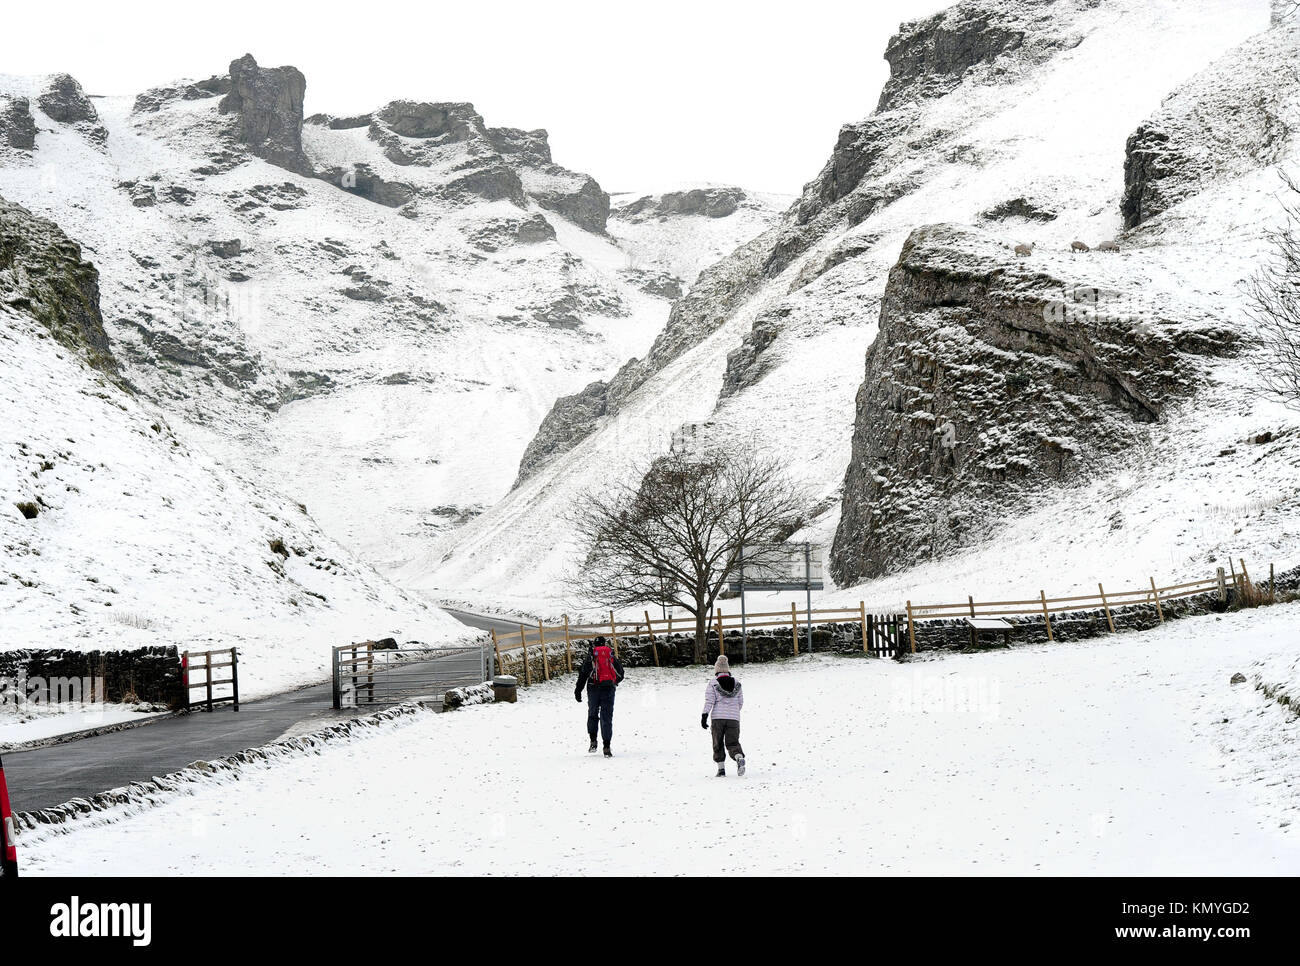 Walkers at Winnats Pass in the Peak District, as widespread disruption is expected as snow continues to fall across large parts of the UK, with forecasters warning some communities could be cut off as temperatures plummet. Stock Photo